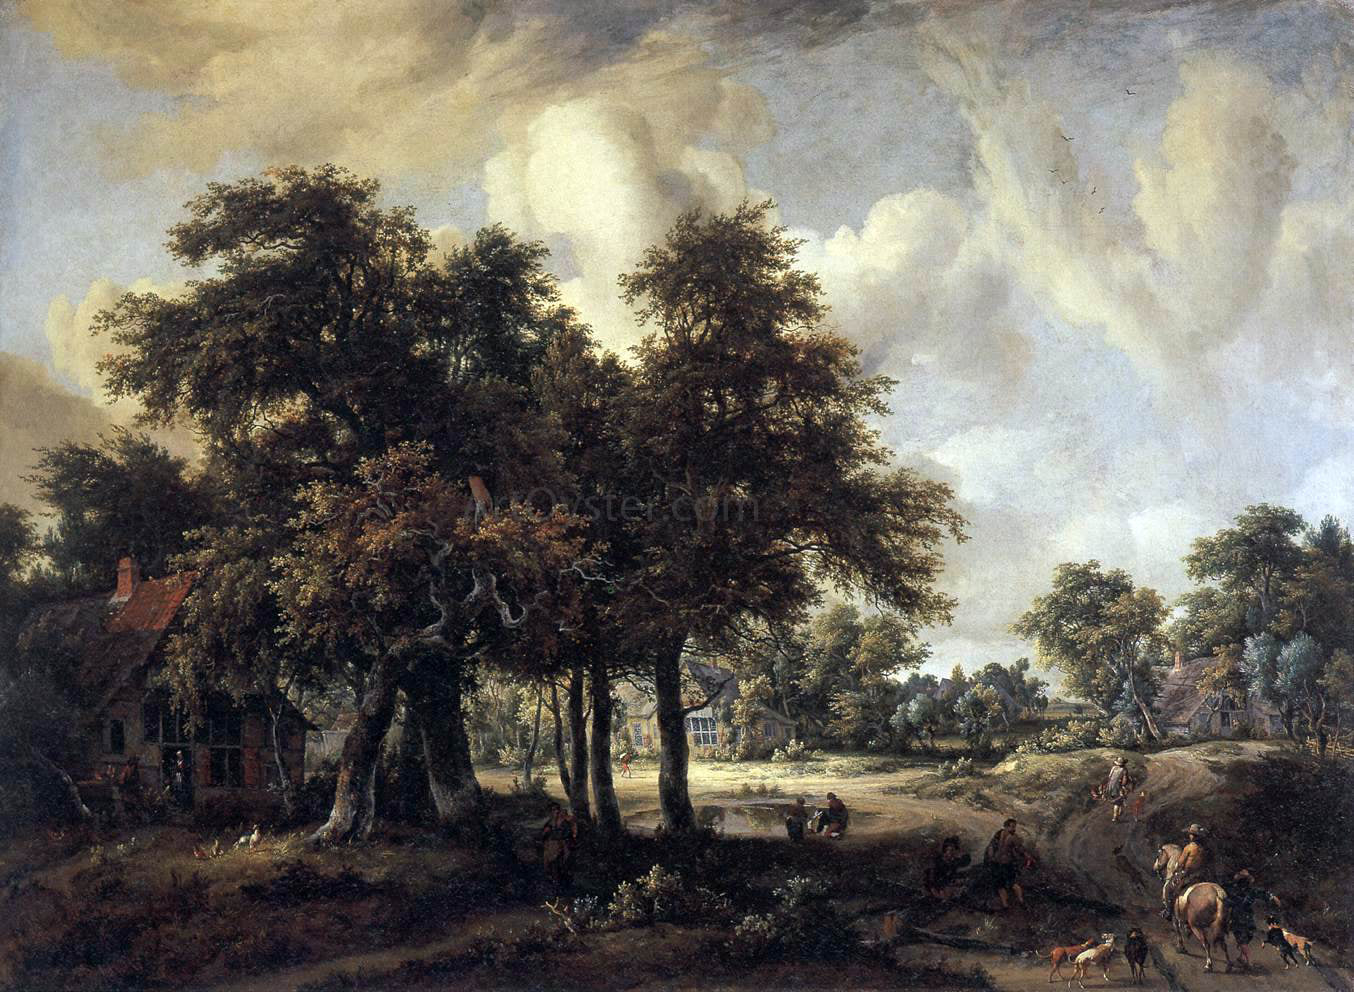  Meyndert Hobbema Wooded Landscape with Cottages - Hand Painted Oil Painting